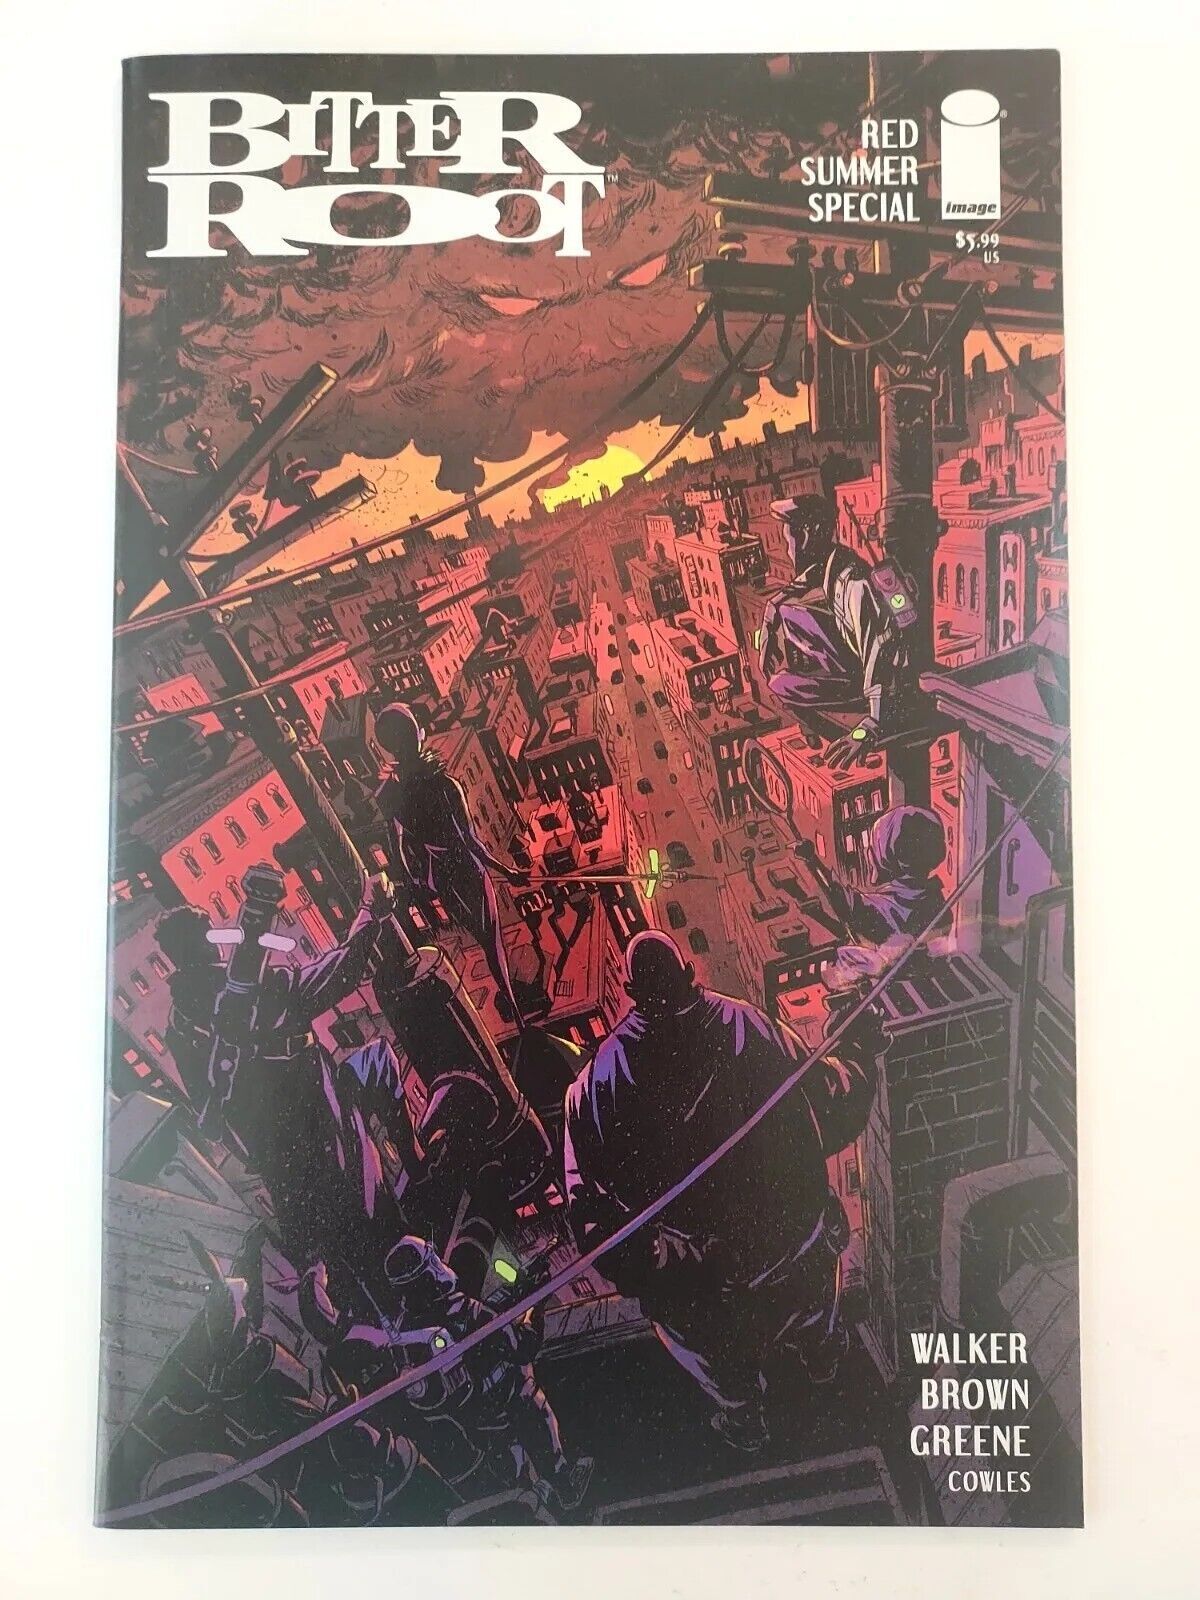 Bitter Root #8-15 & Red Summer Special | Select Covers | Image Comics NM Без бренда - фотография #2